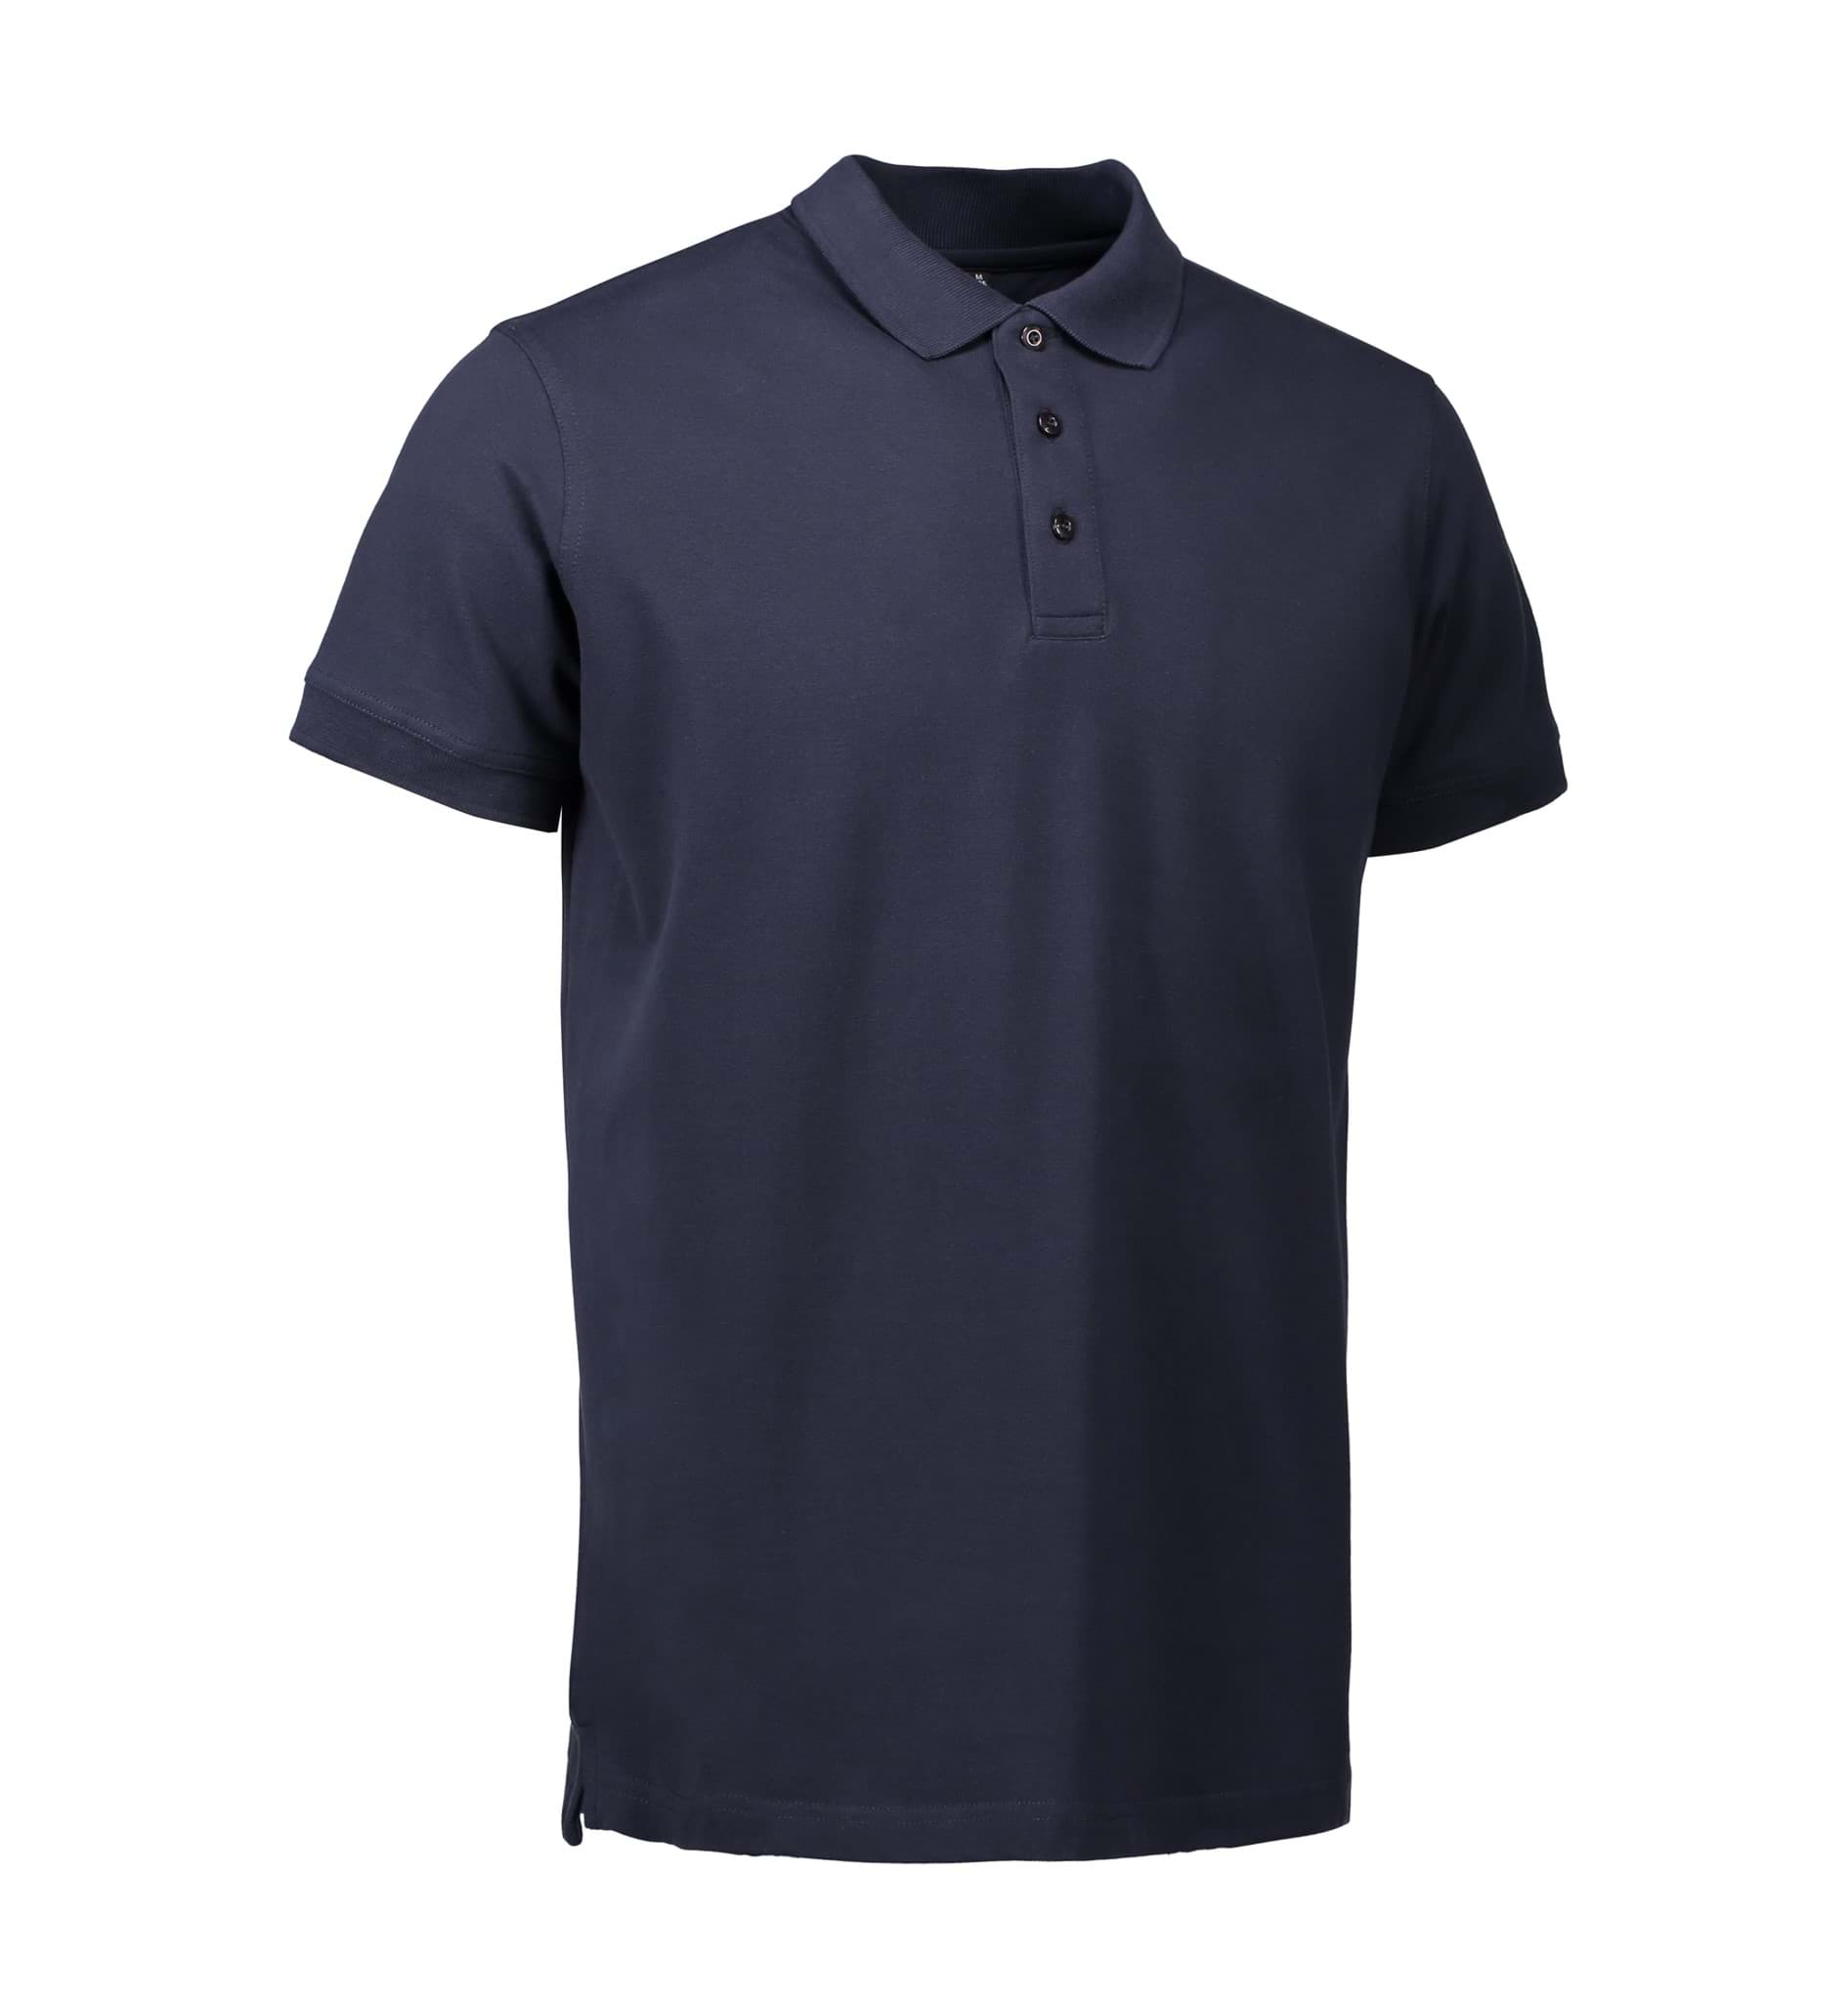 Picture for category polo shirts